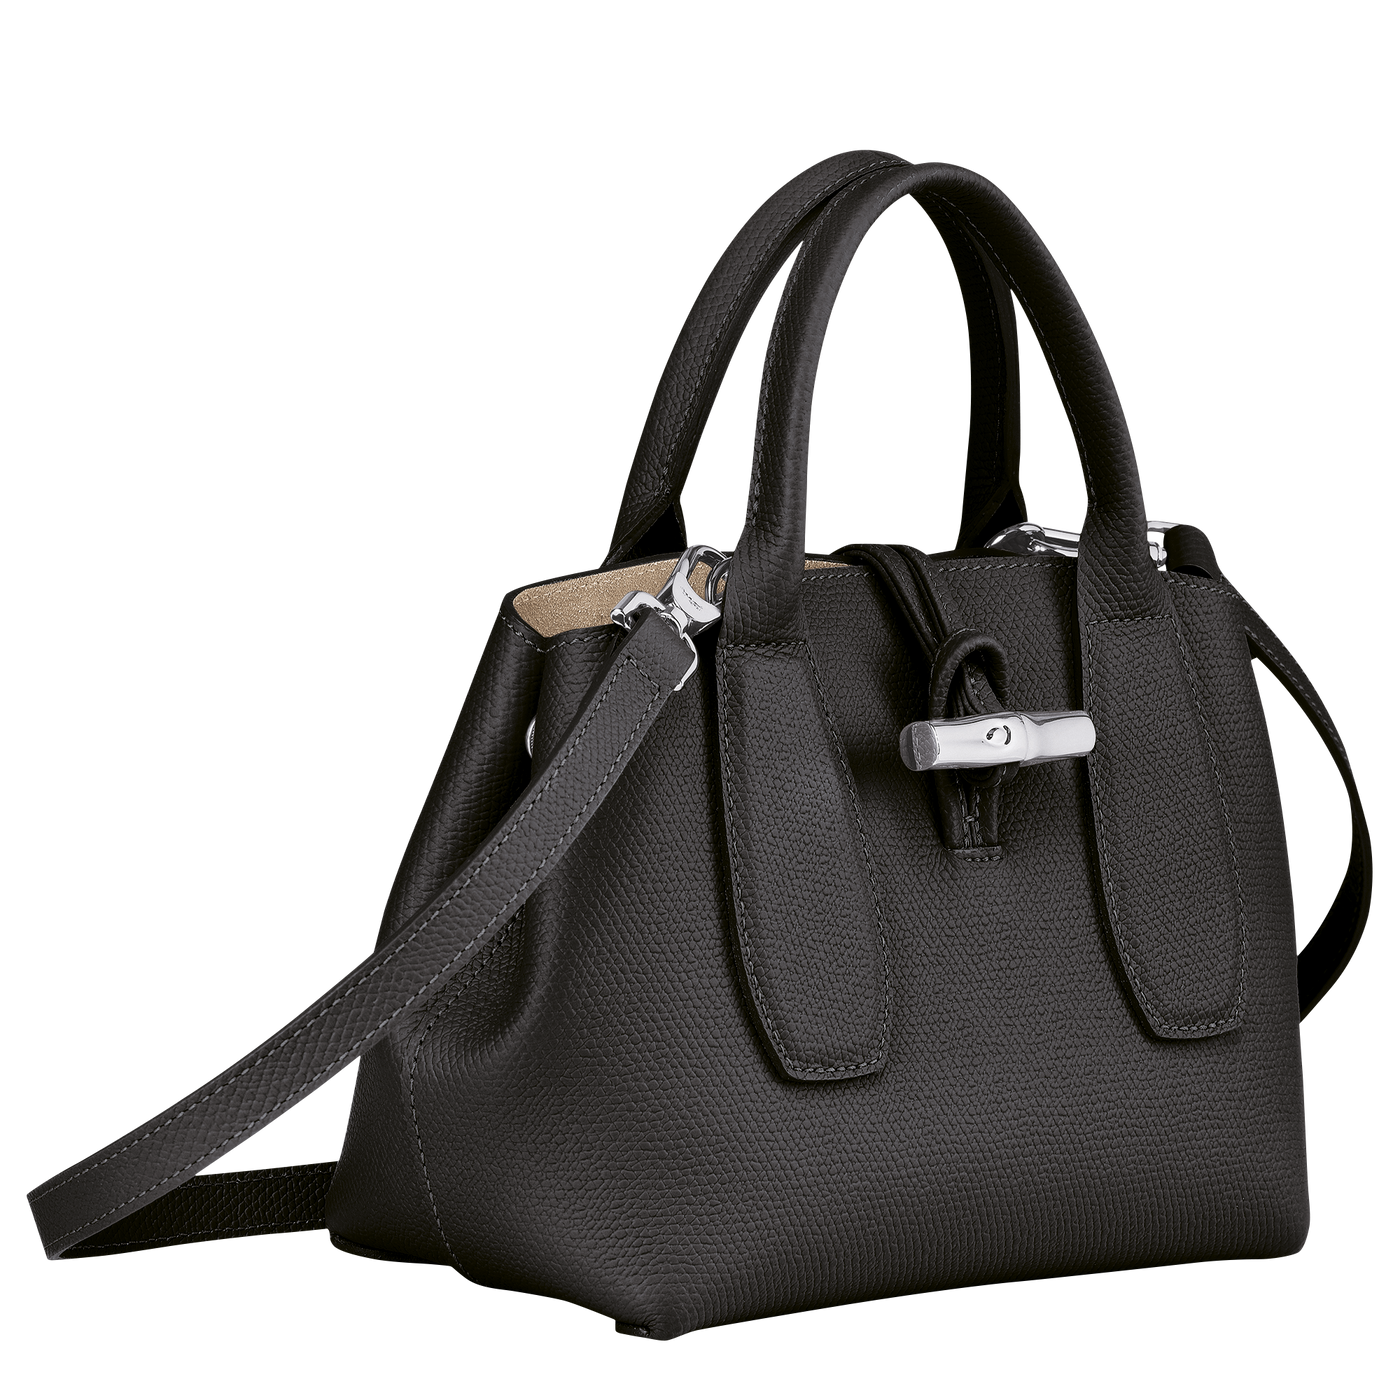 Shop The Latest Collection Of Longchamp Roseau Top Handle Bags - 10095Hpn In Lebanon